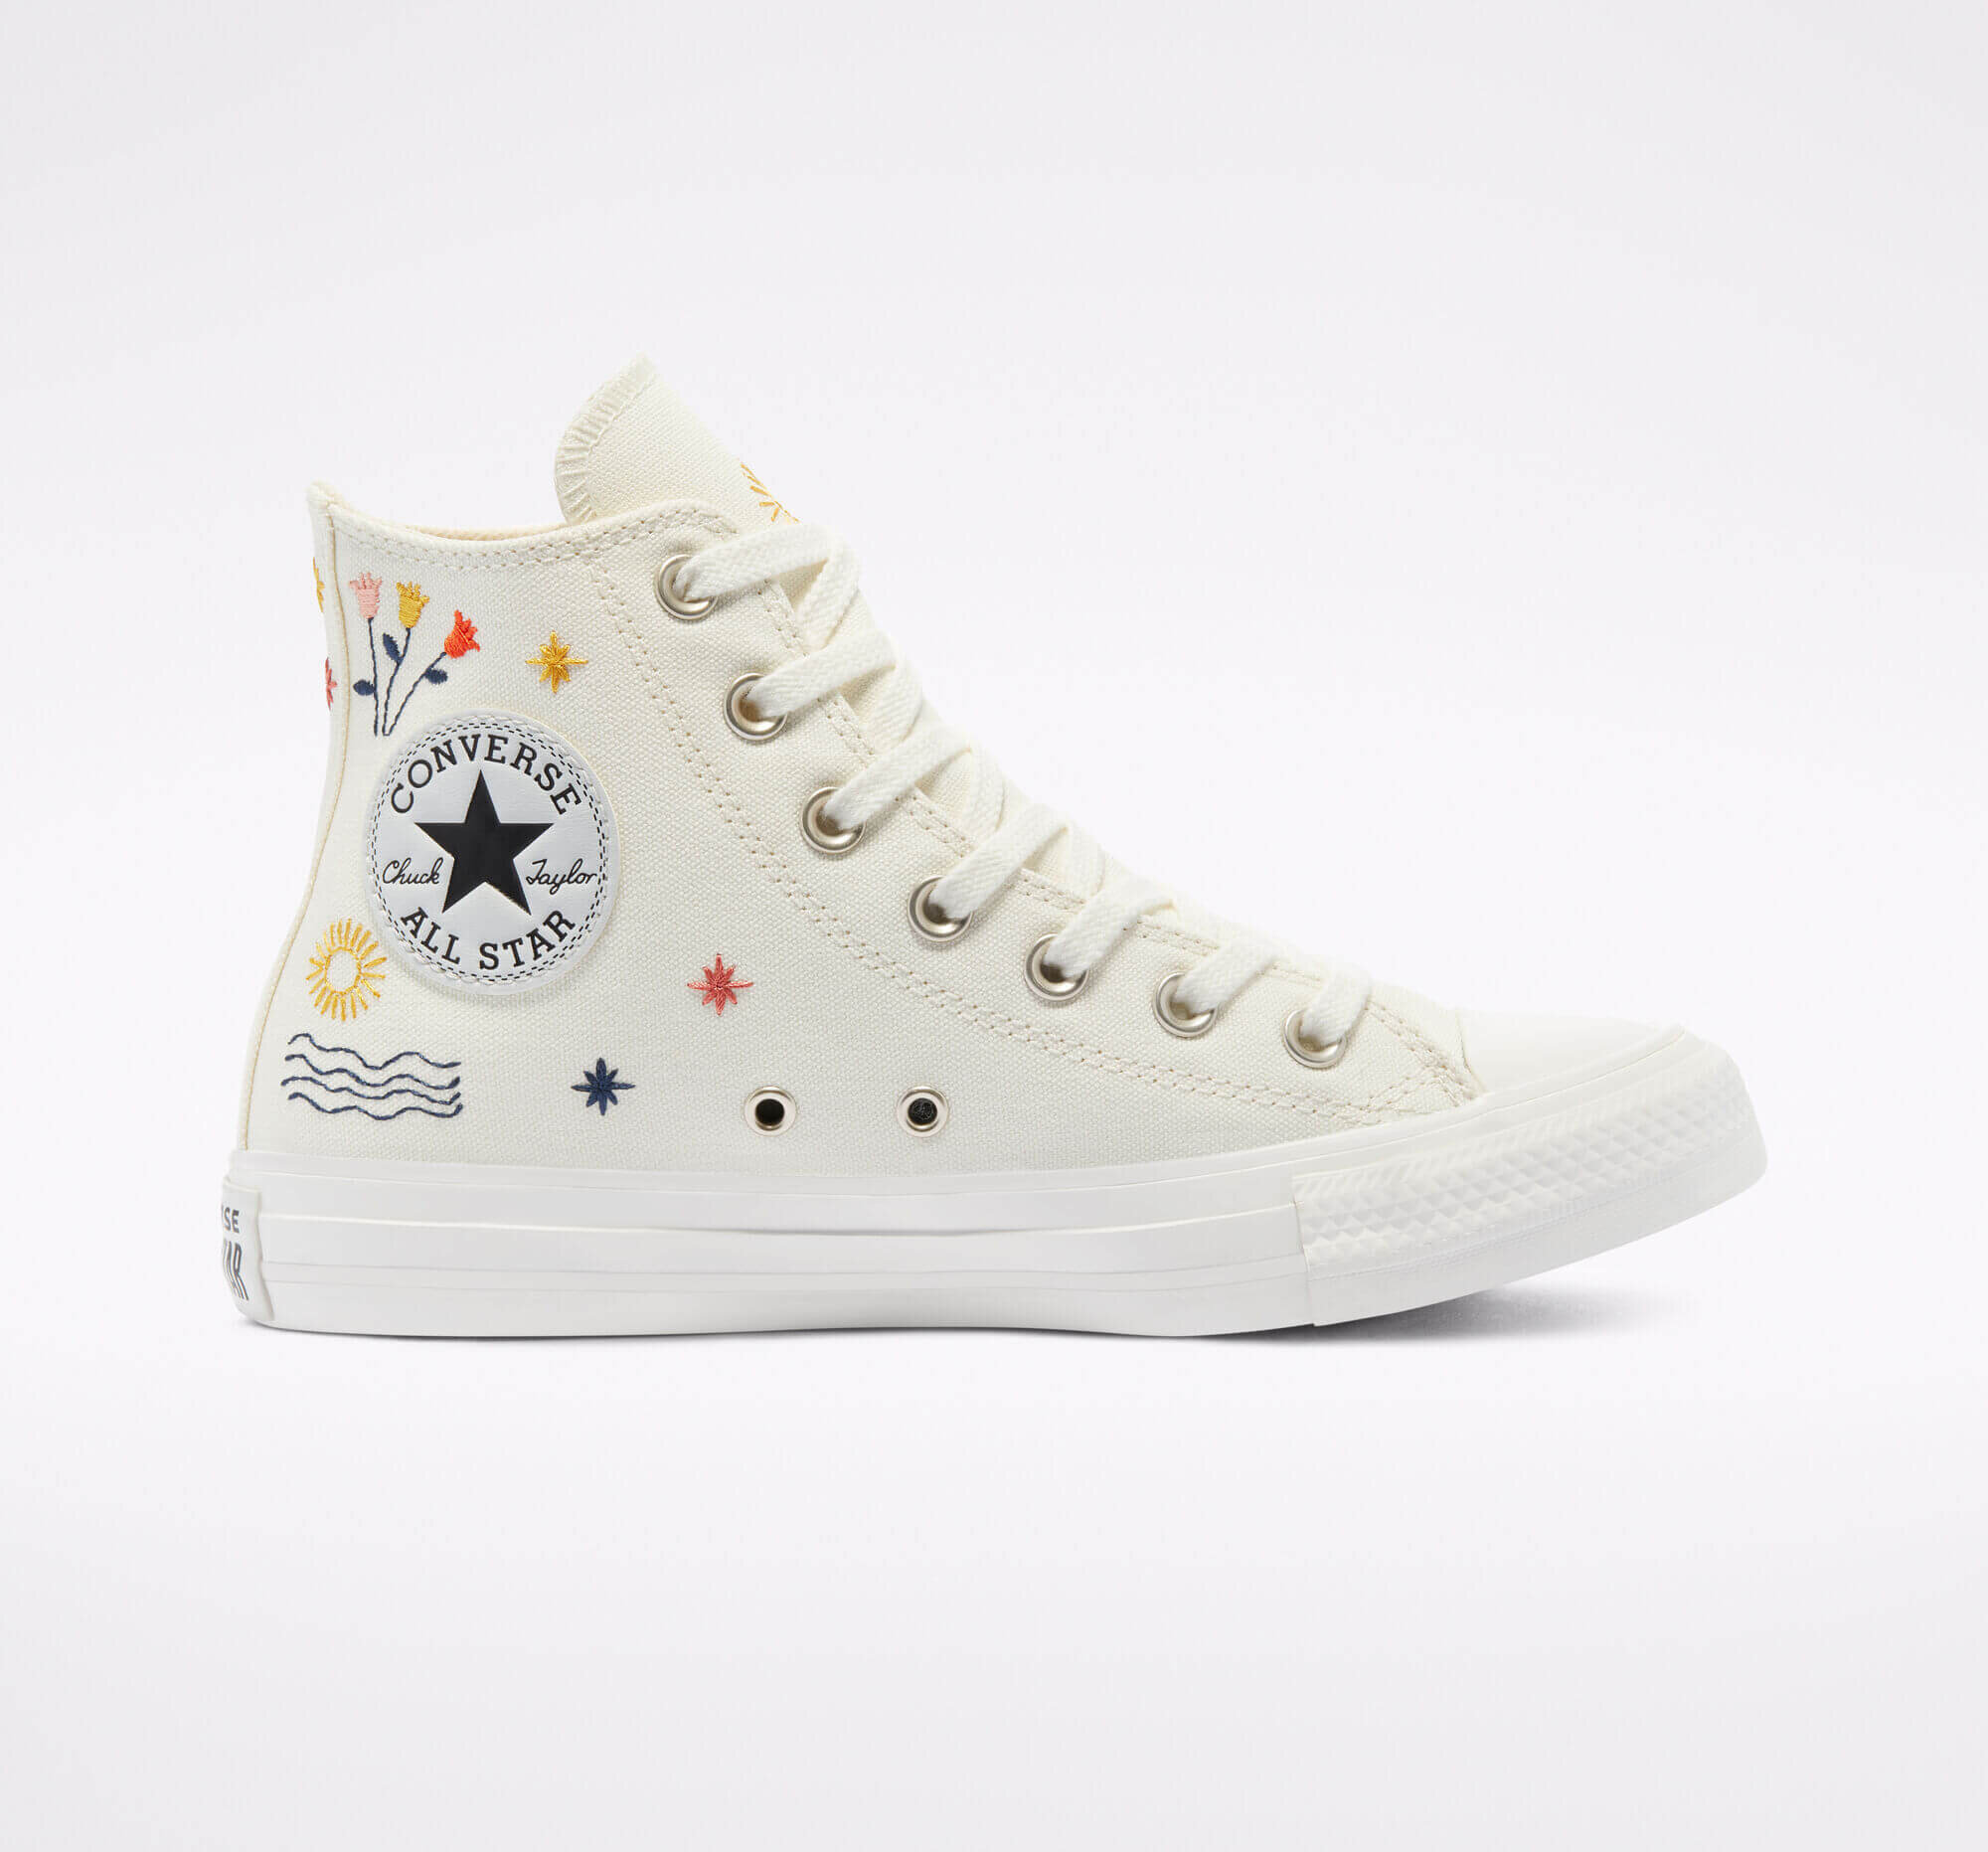 CNK-Converse-My-Story-Collection-Its-Okay-To-Wander-Egret-Vintage-White-All-Star-High-1.jpg